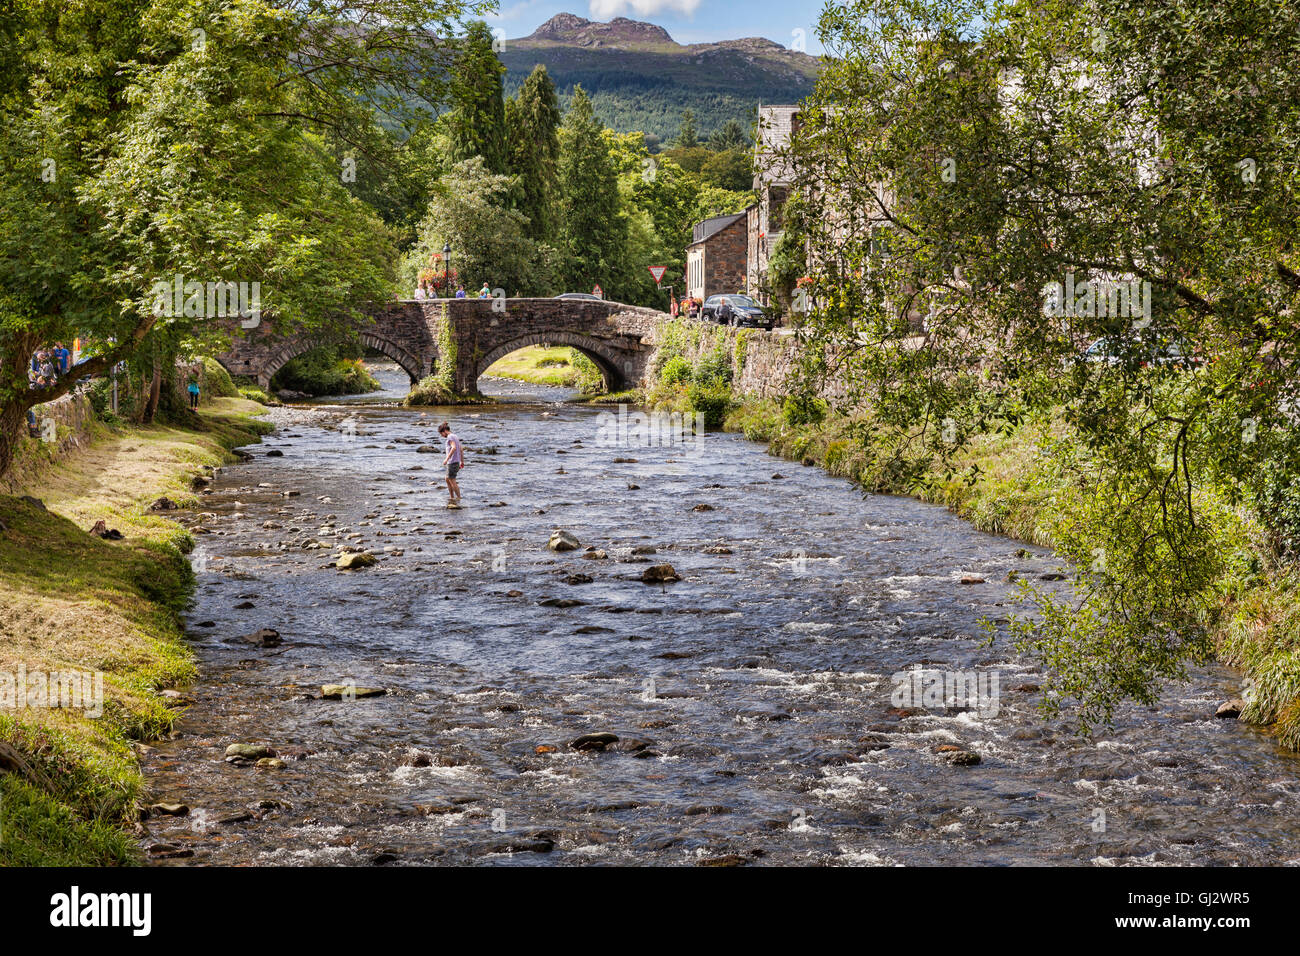 The River Glaslyn at Beddgelert, Snowdonia National Park, Wales, UK Stock Photo